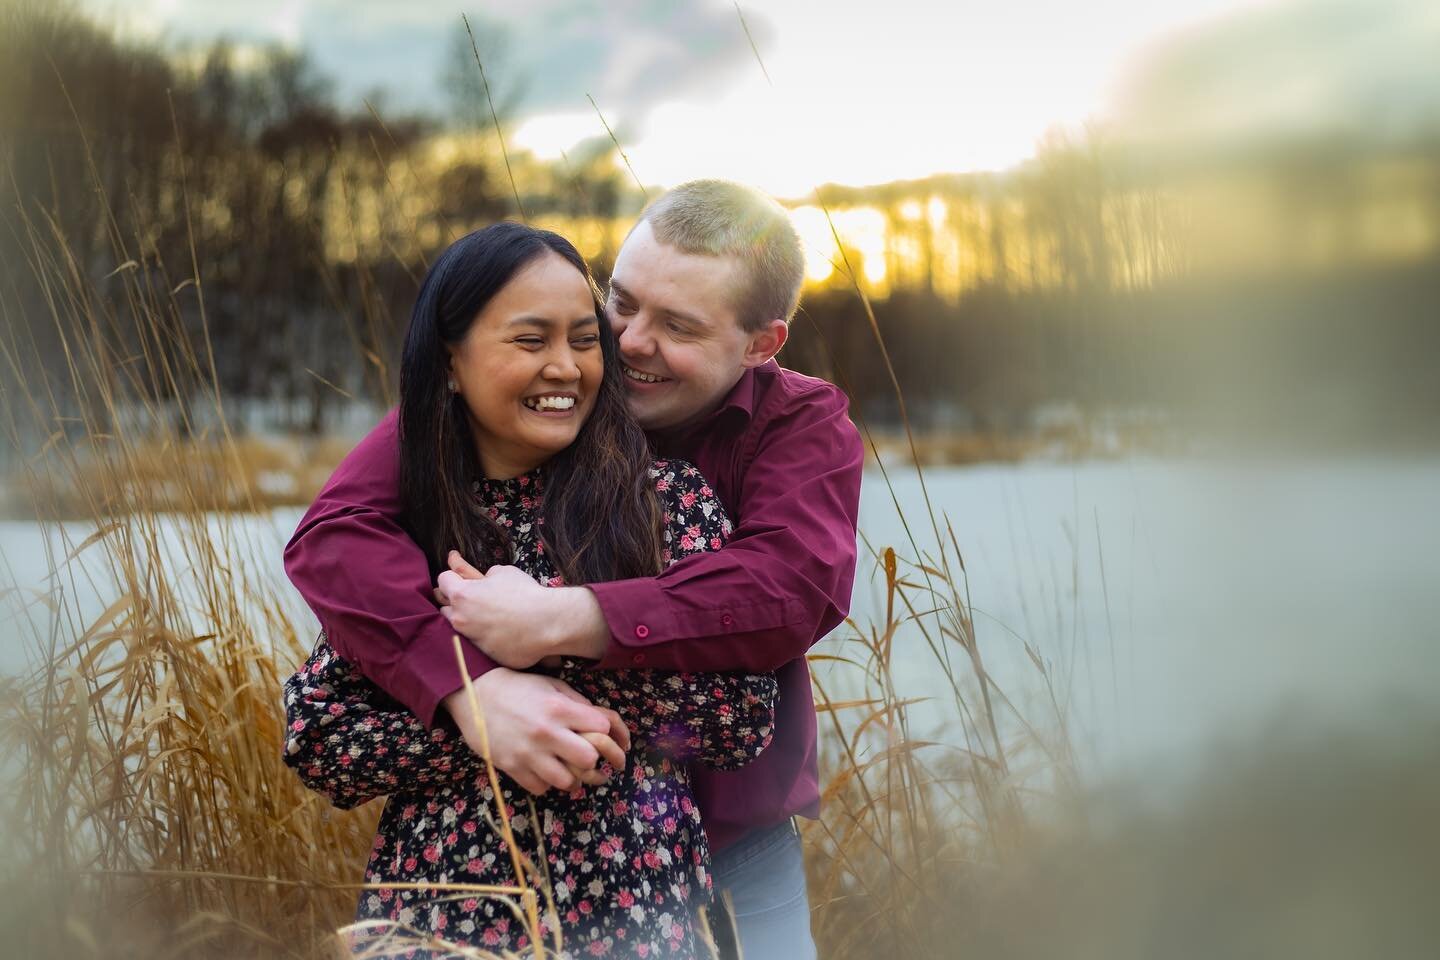 Why you should book a session with just you and your partner: 
1️⃣. Every new moment that you share together deserves to be remembered. Why not cement those moments and feelings in photos? 
2️⃣. They&rsquo;re a whole lot of fun, and you won&rsquo;t f